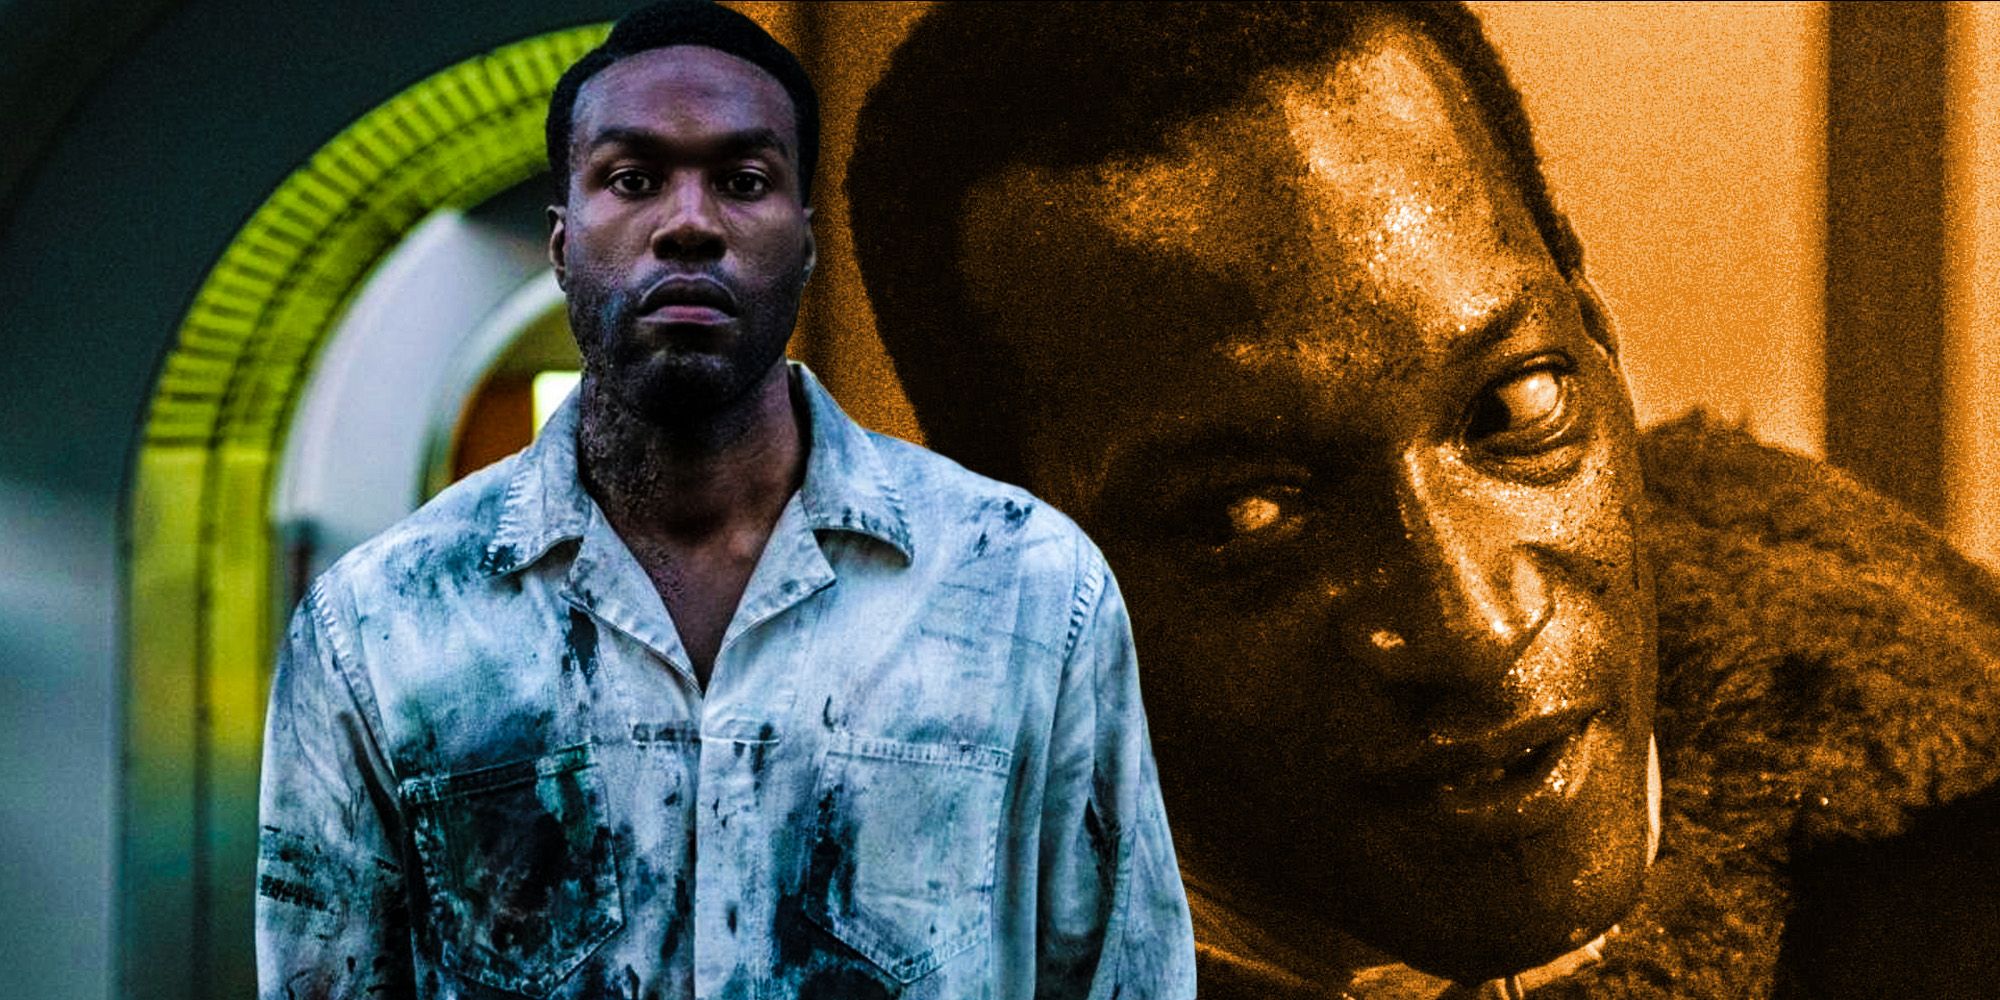 The Candyman 2021 connected to the original movies